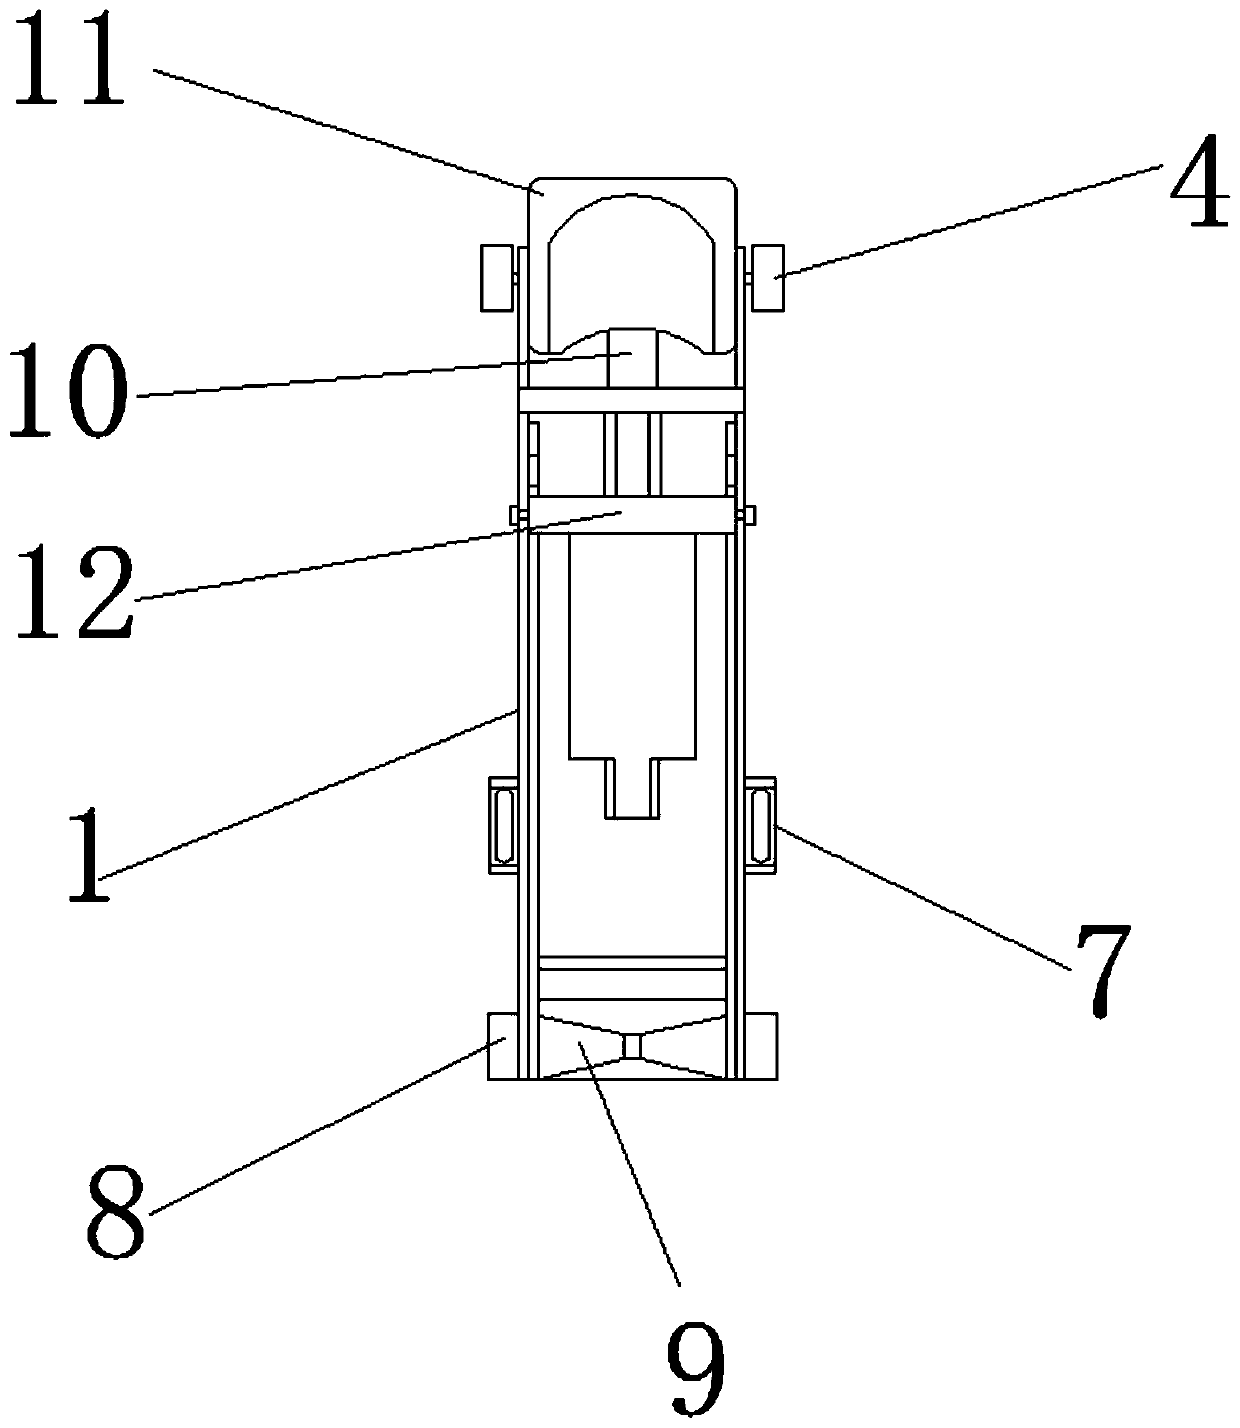 A device for measuring tibial anteroposterior movement